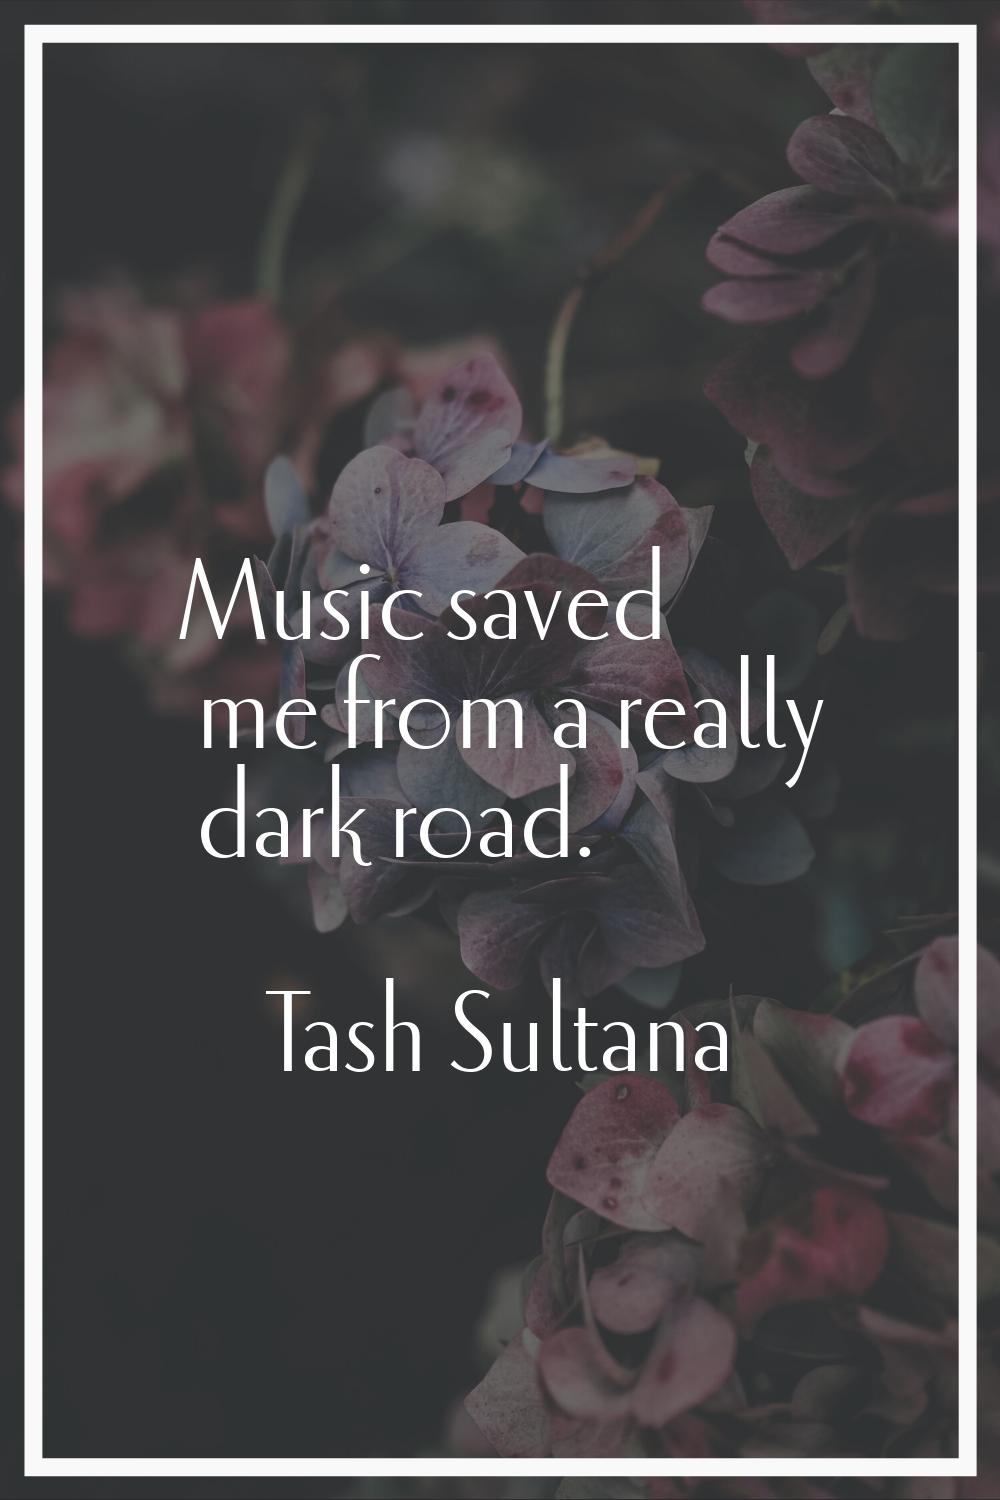 Music saved me from a really dark road.